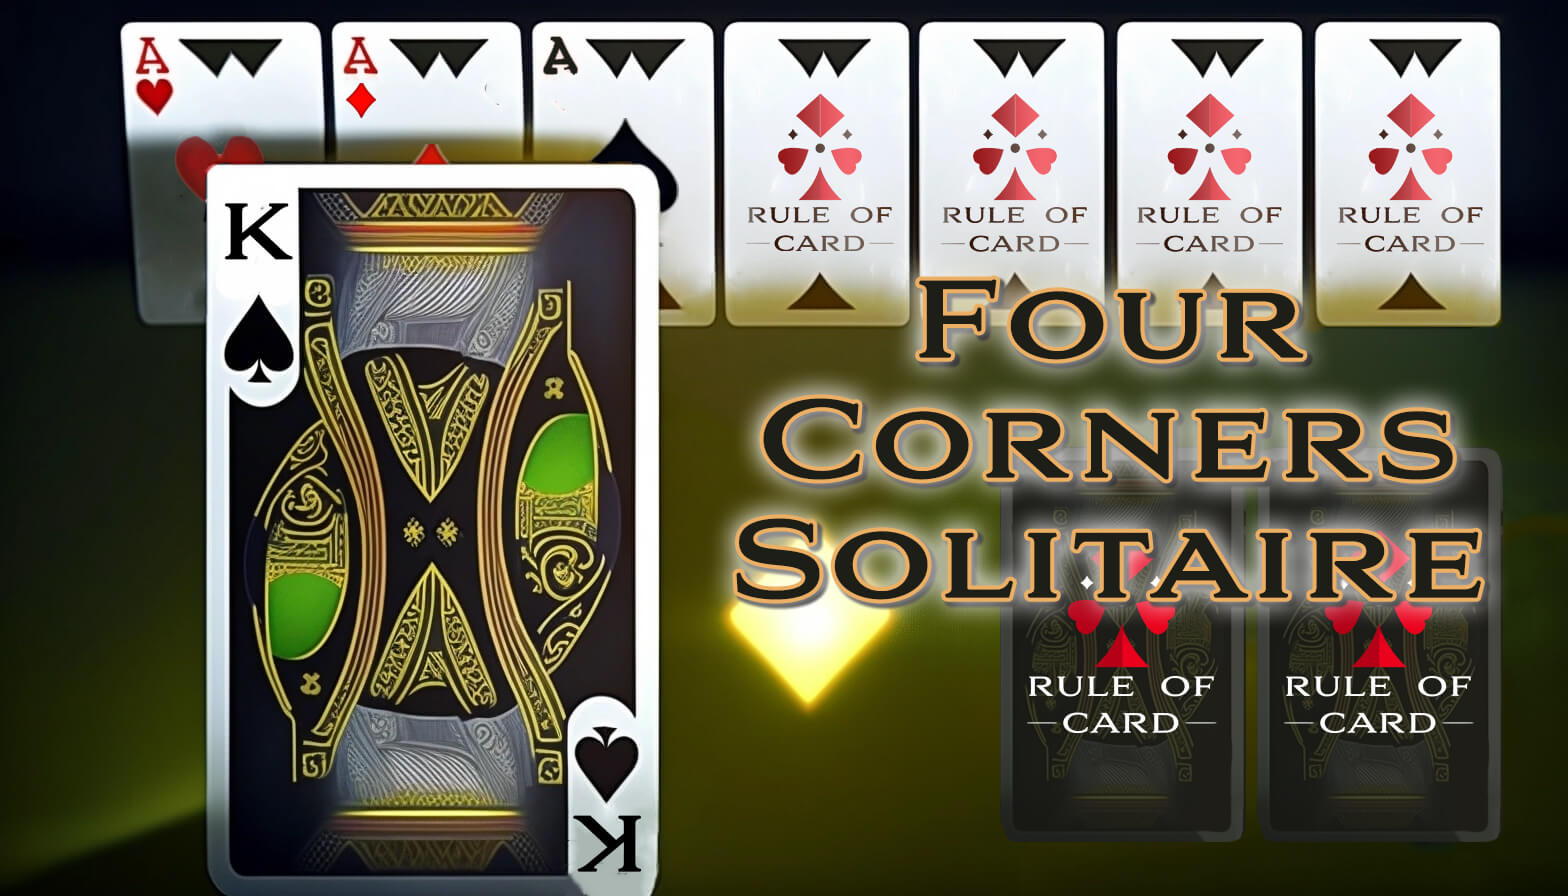 Playing the card game Four Corners Solitaire